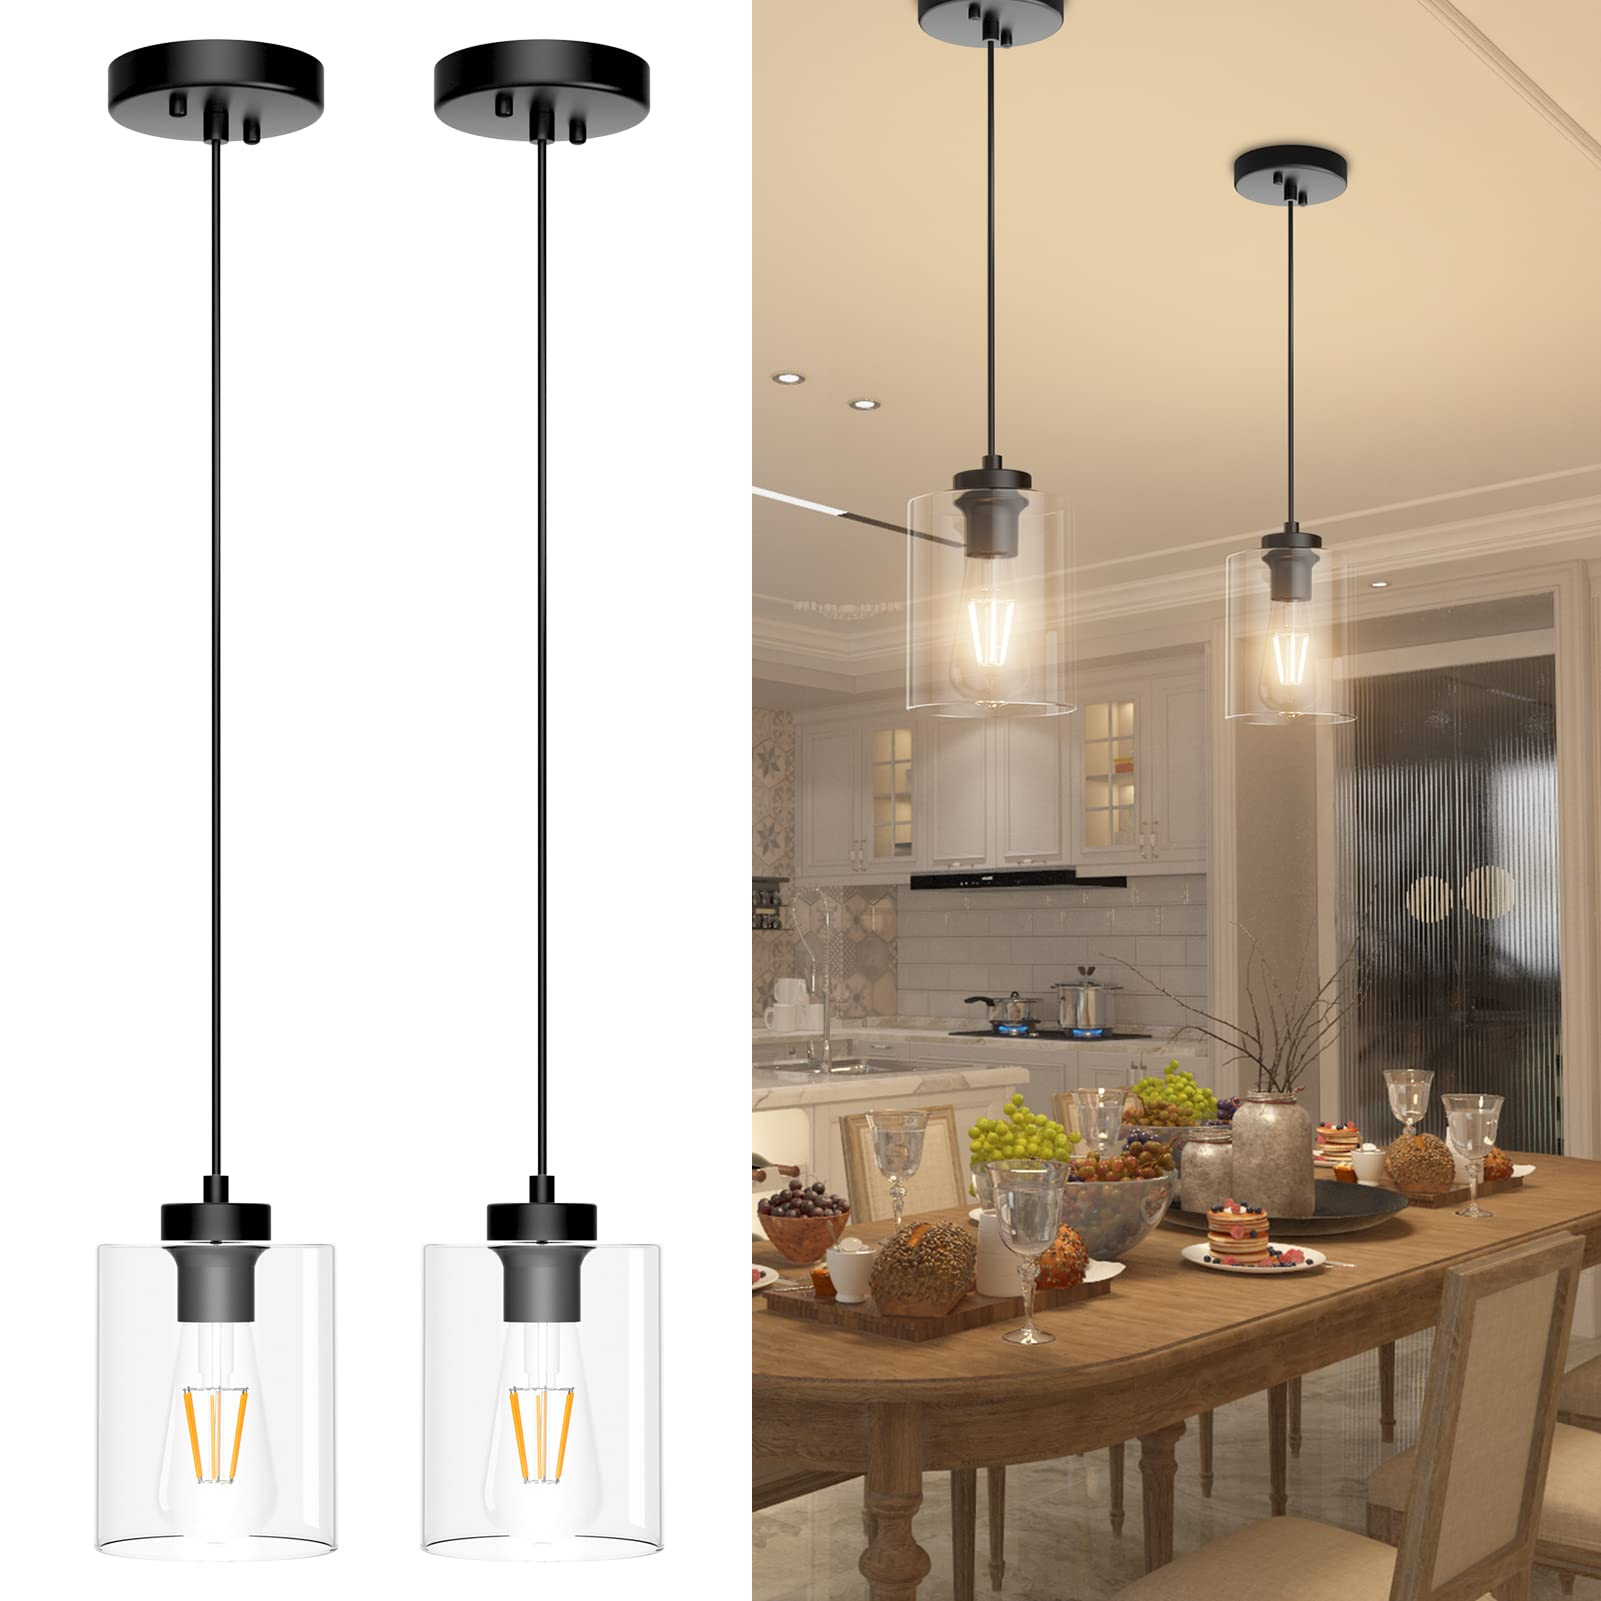 1-Light Indoor Mini Pendant Light (2 Pack),Matte Black E26 Base with Clear Seeded Glass Shade for Bar, Dining Room, Bedroom, Living Room